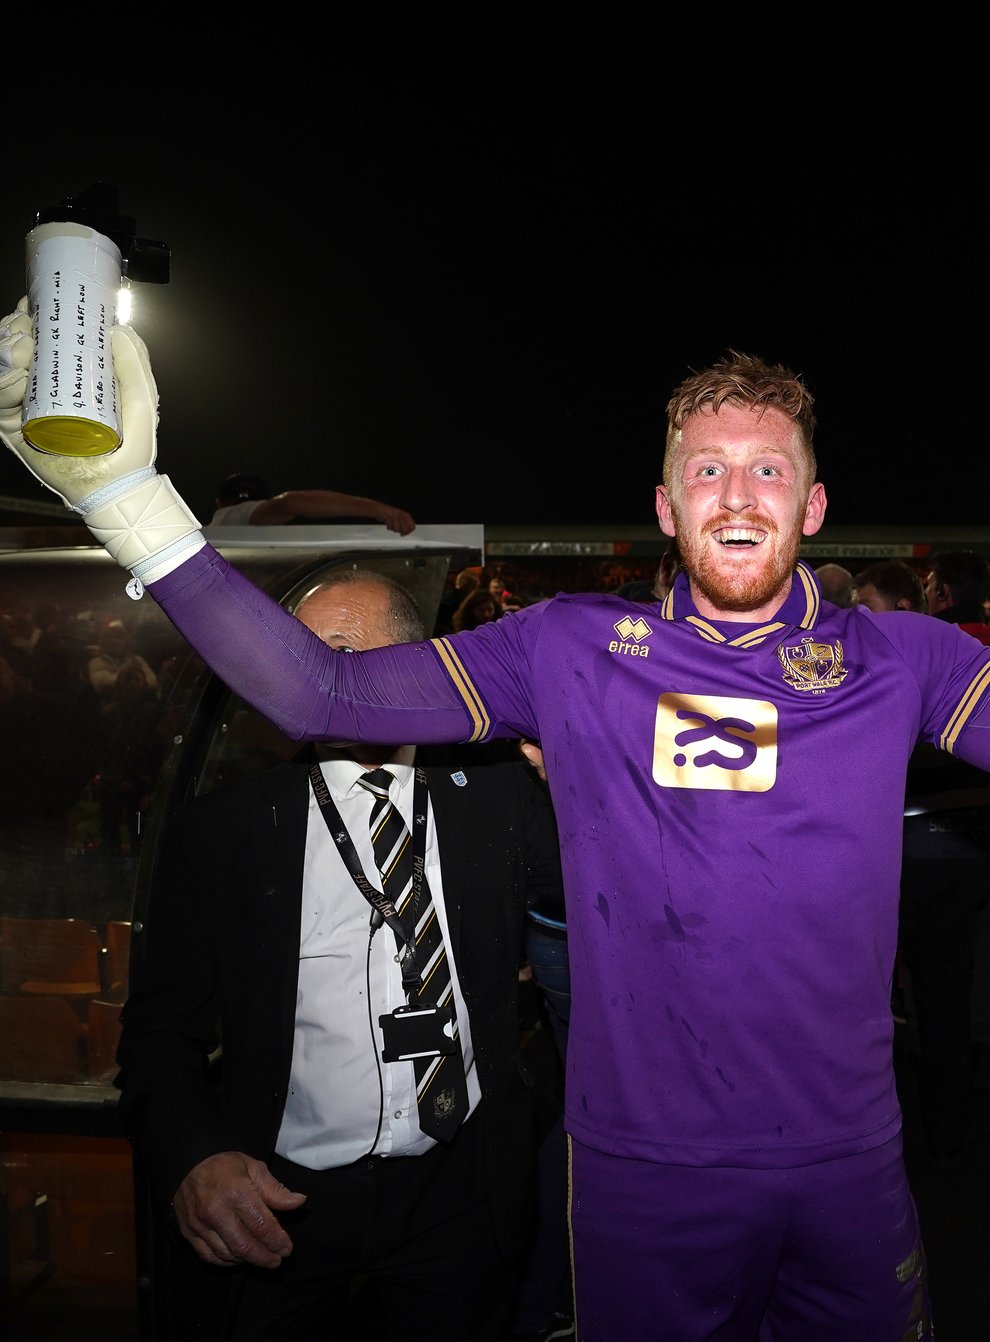 Port Vale goalkeeper Aidan Stone celebrates victory in the penalty shoot-out (Nick Potts/PA)